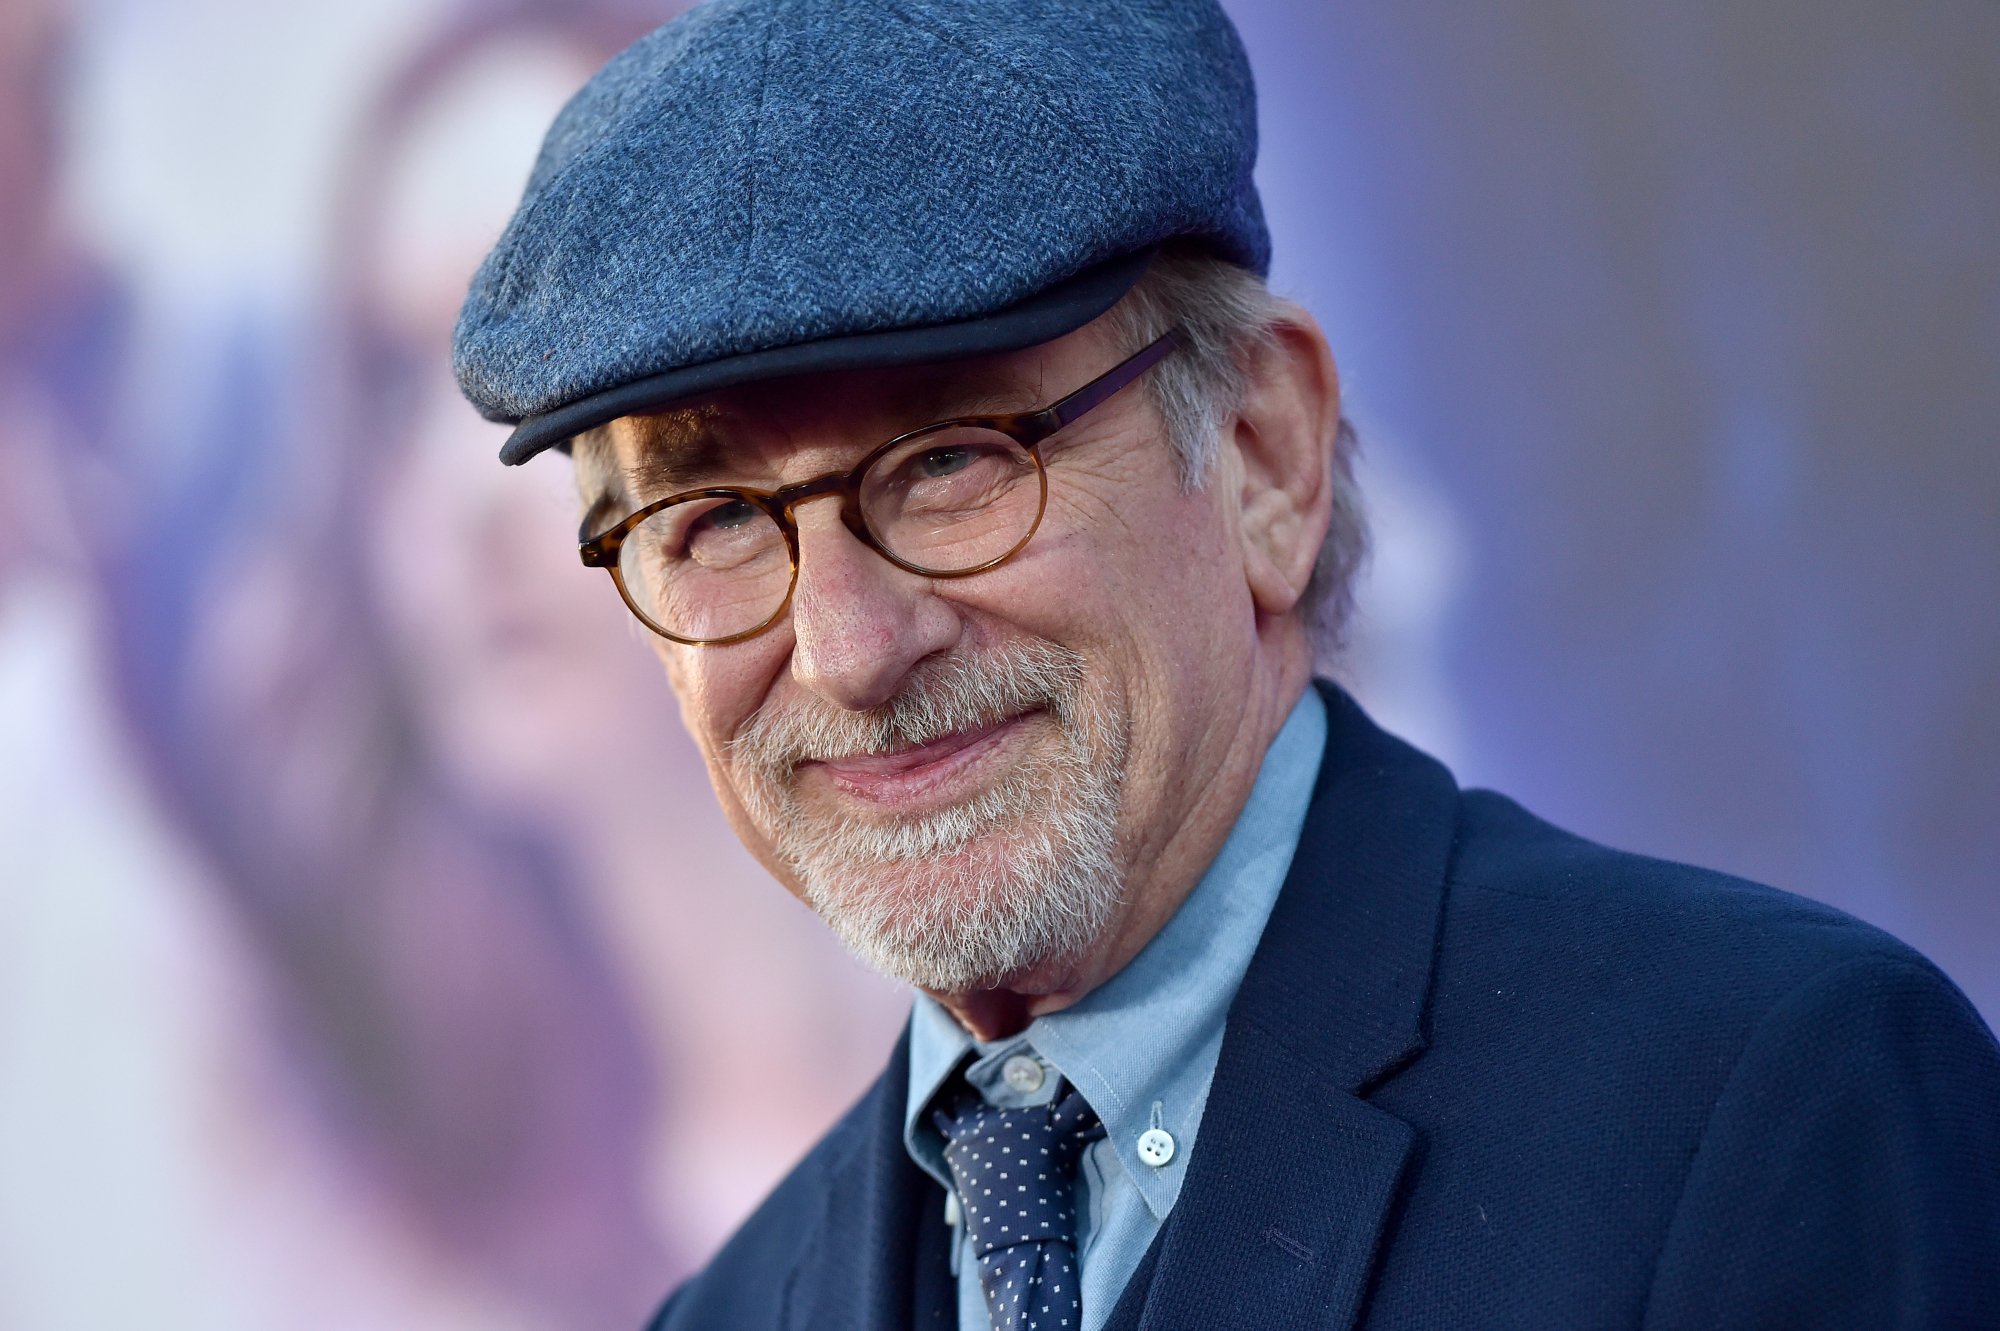 'Saving Private Ryan' filmmaker Steven Spielberg smiling with a hat on